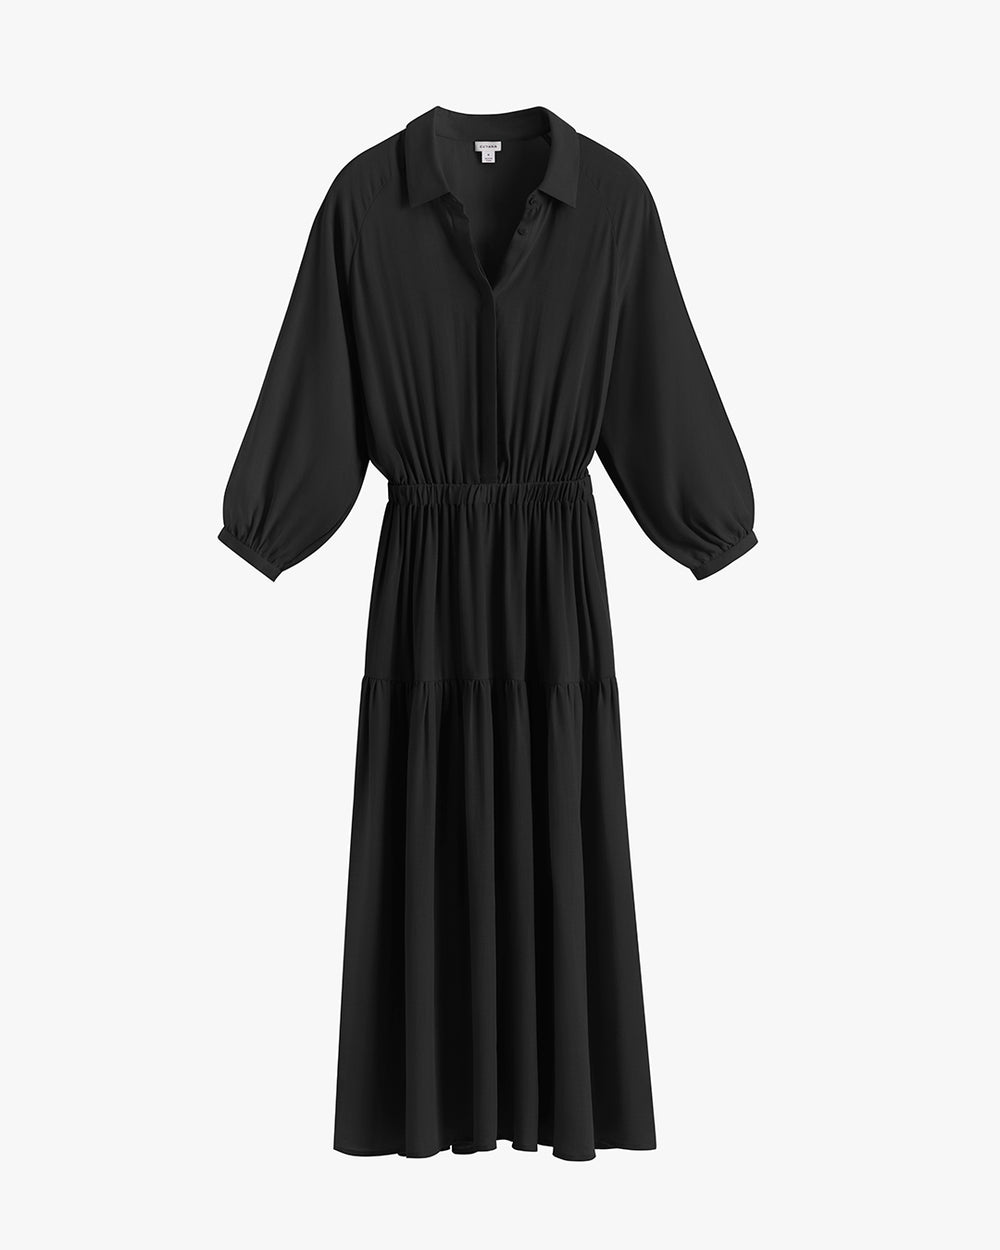 Long-sleeved dress with collar and gathered waist.